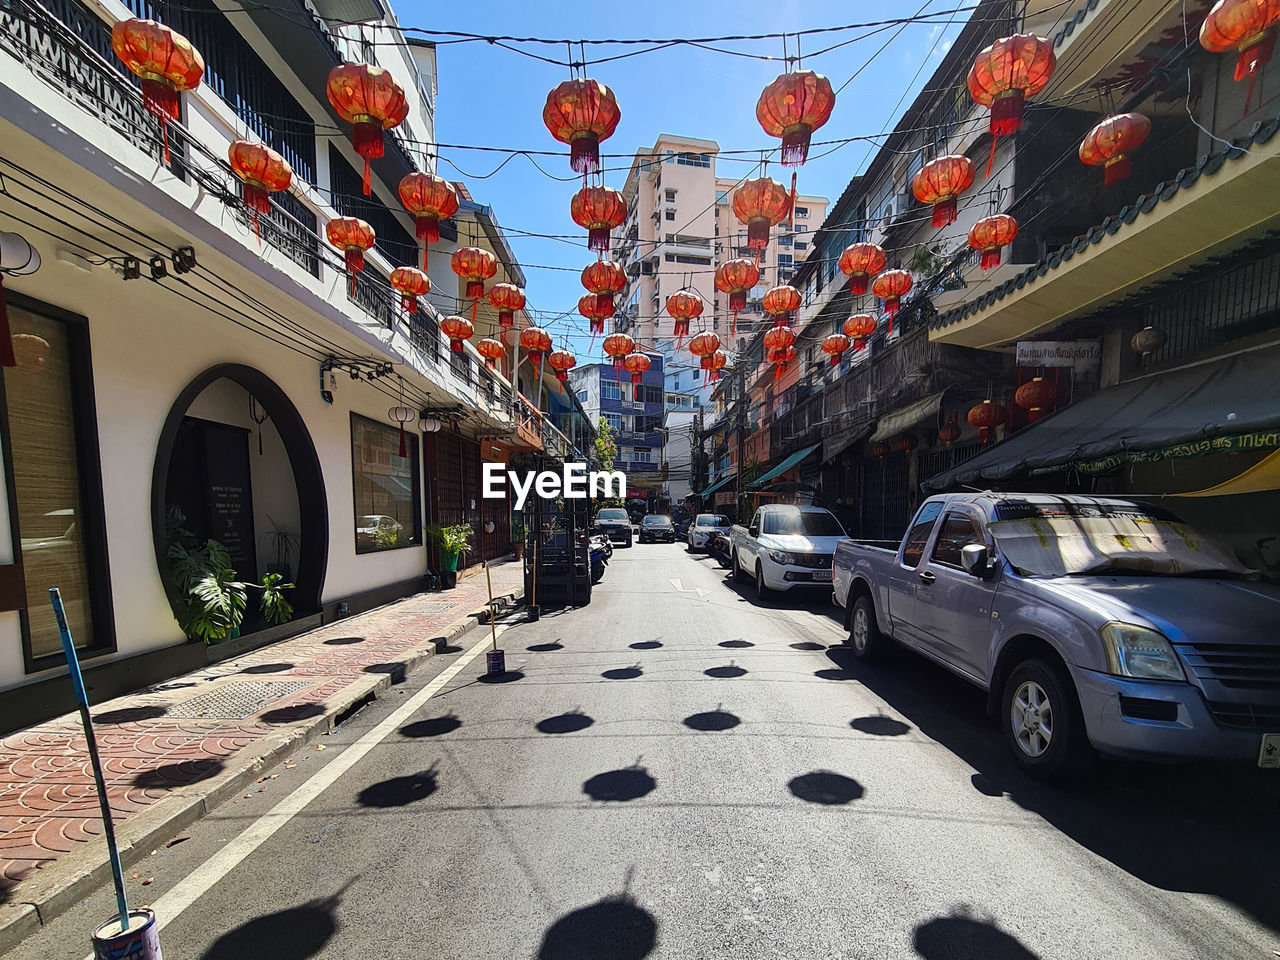 Lantern lined street amidst buildings in city